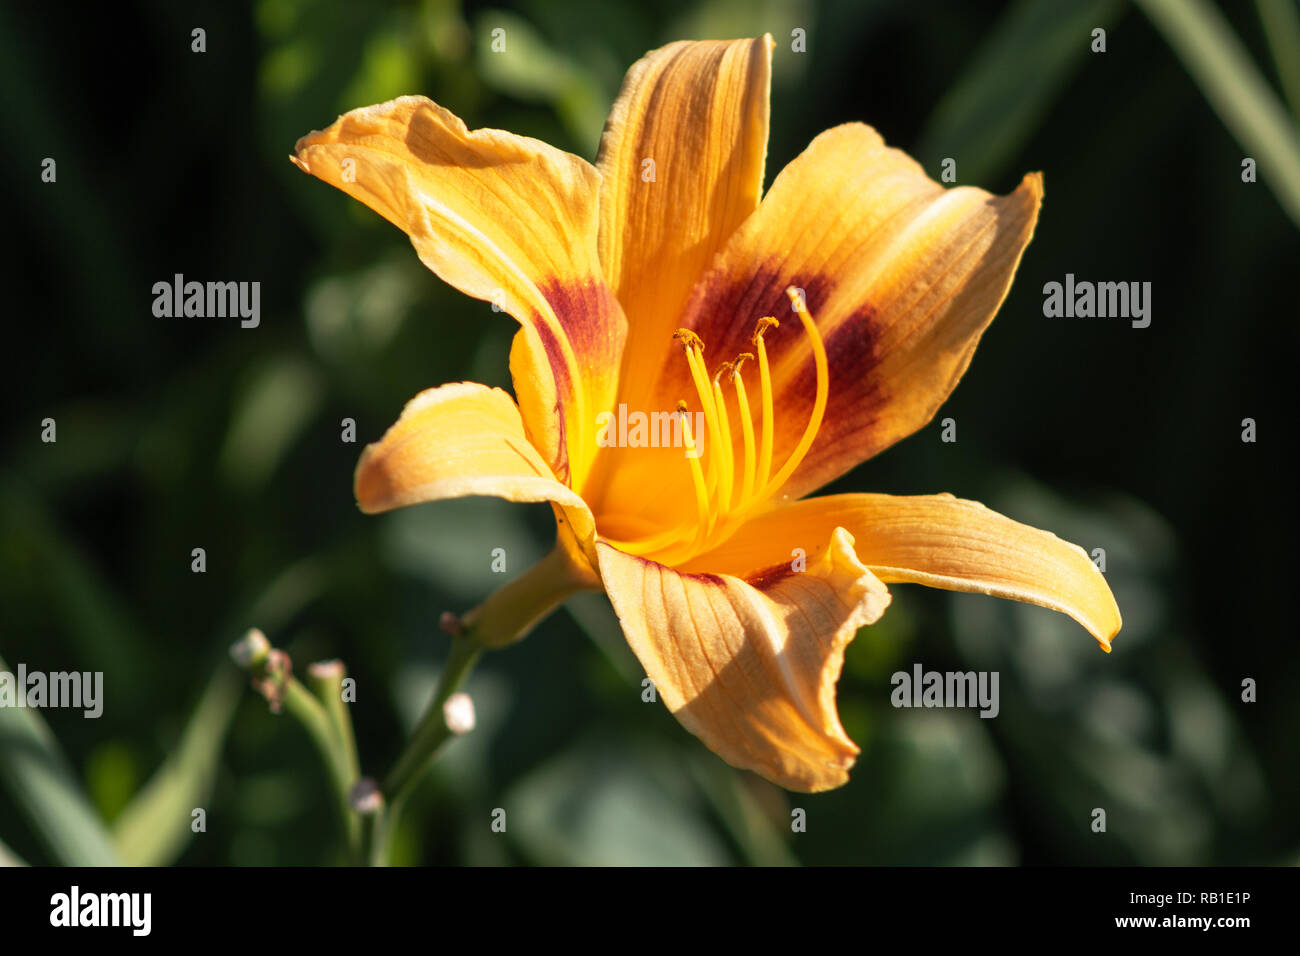 Orange Day Lily growing in a garden Stock Photo